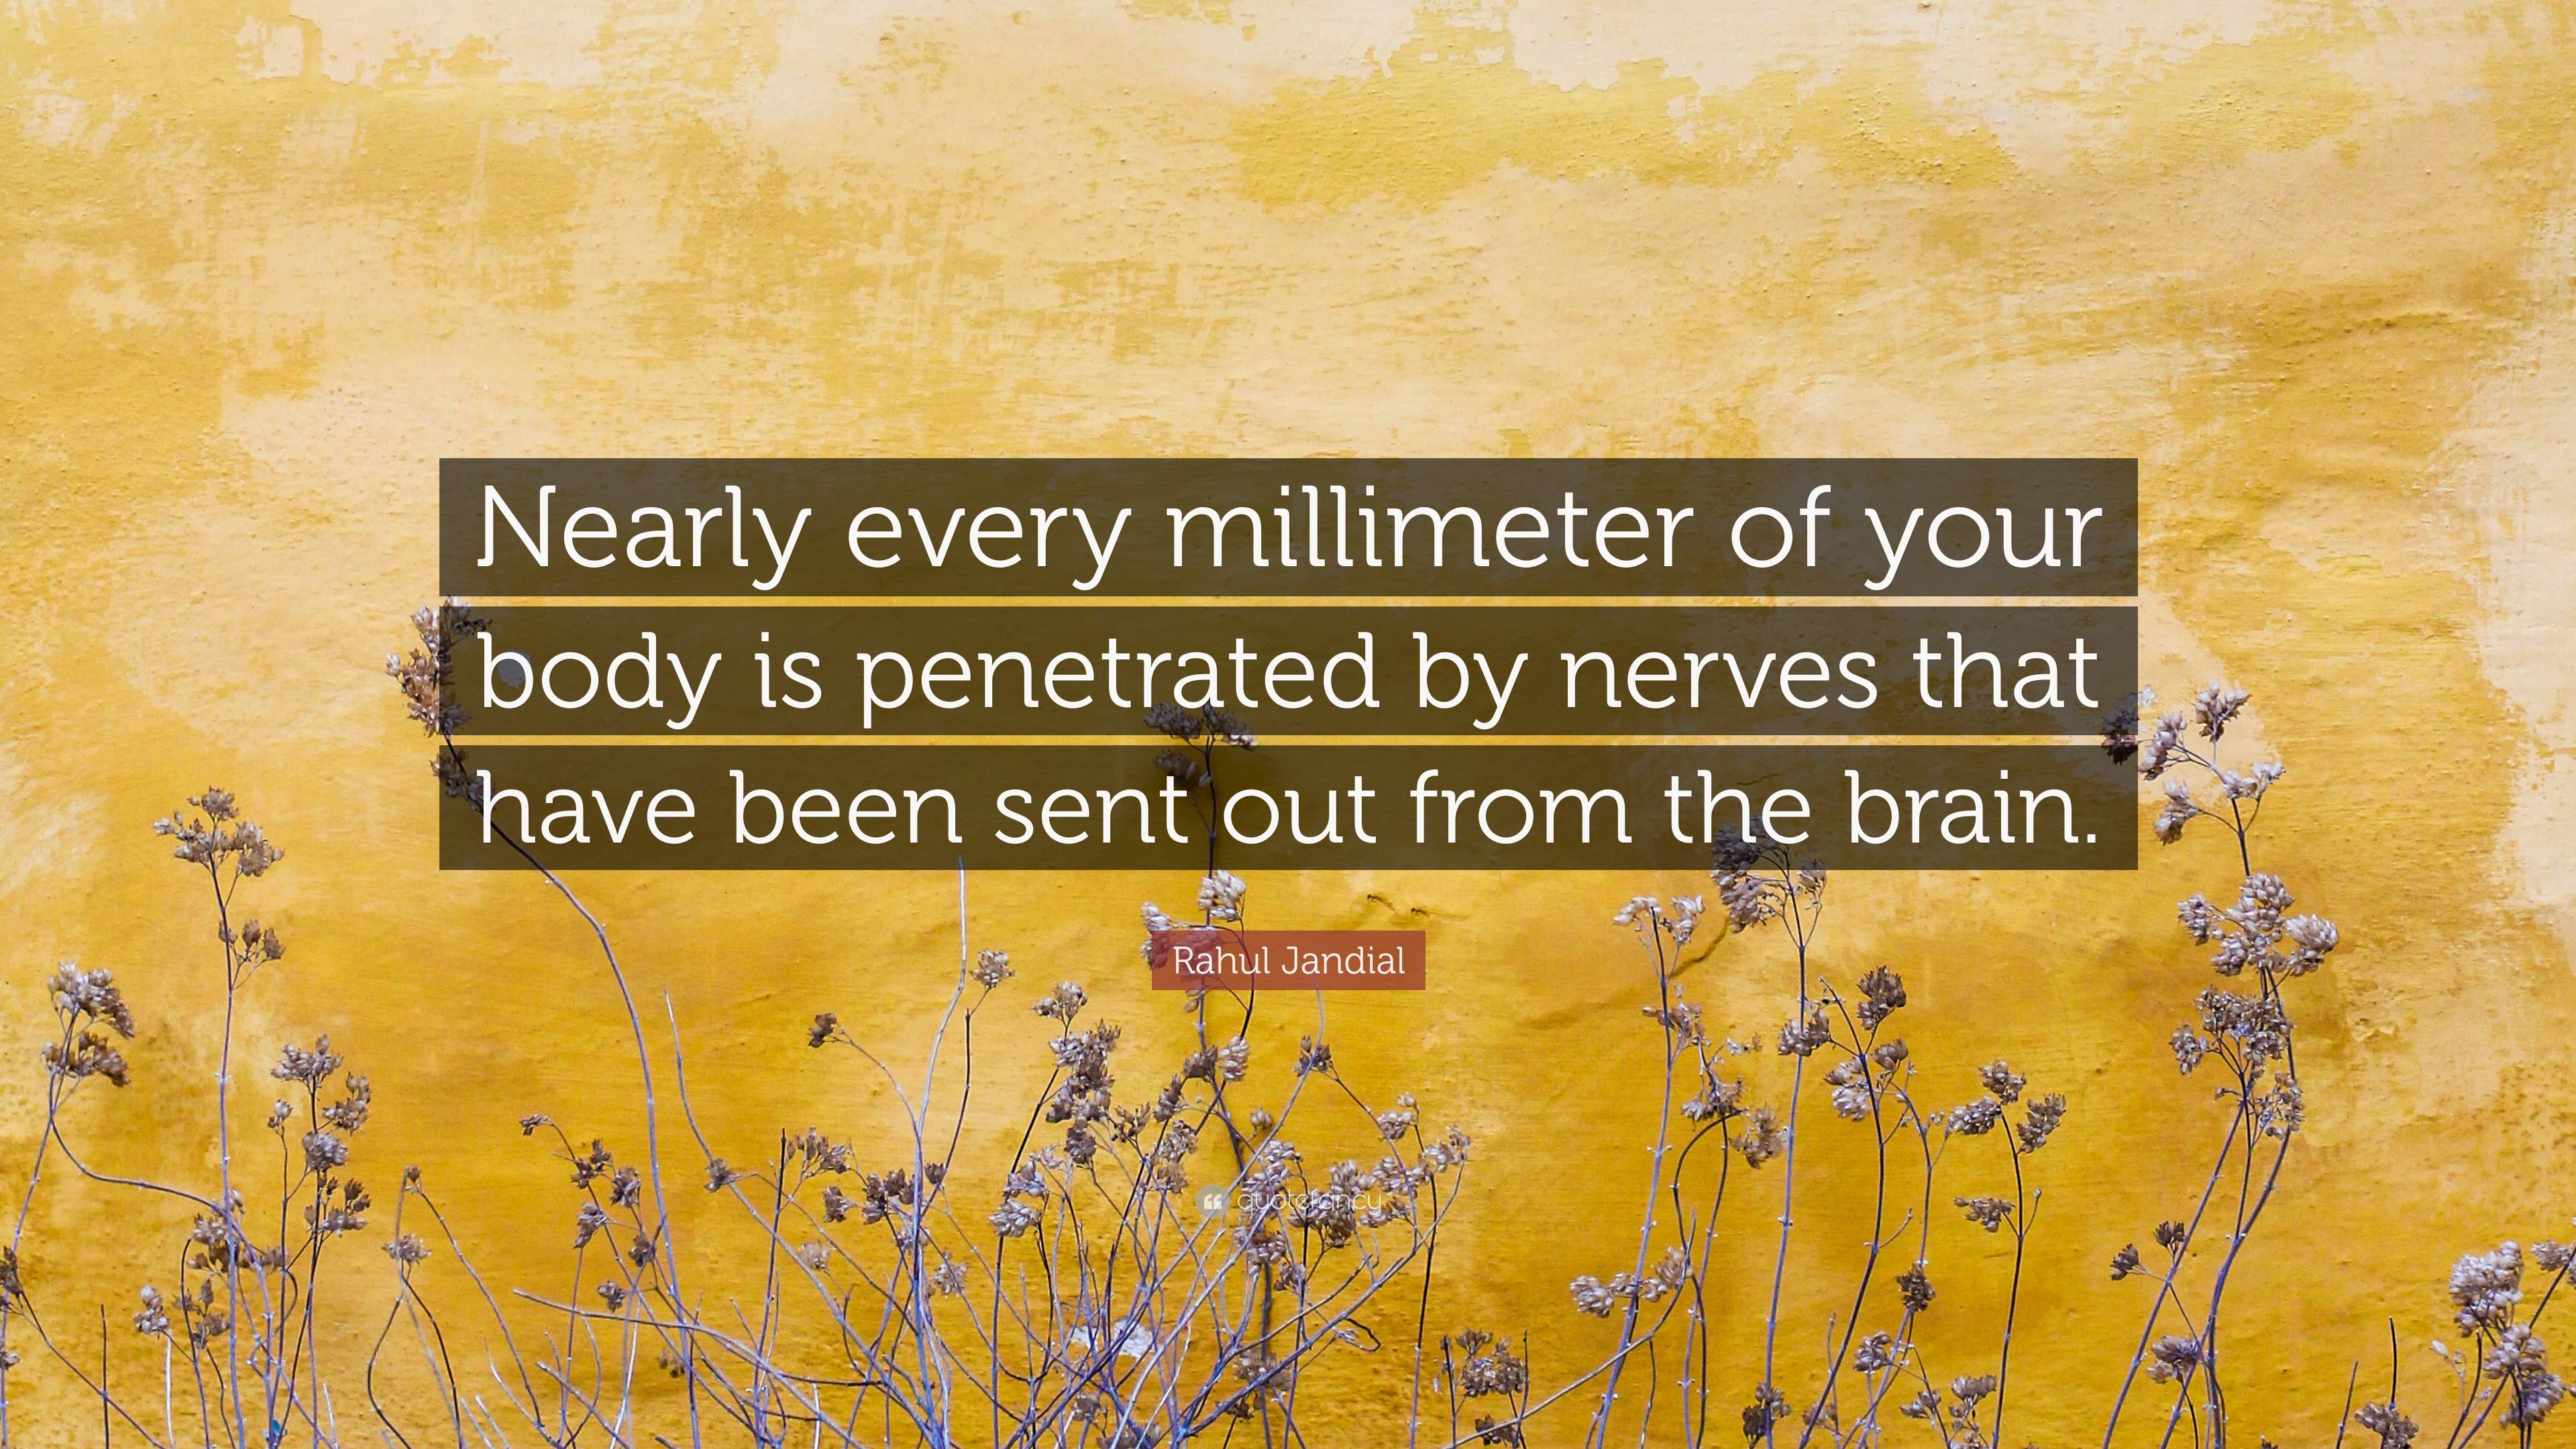 Rahul Jandial Quote: “Nearly every millimeter of your body is penetrated by nerves that have been